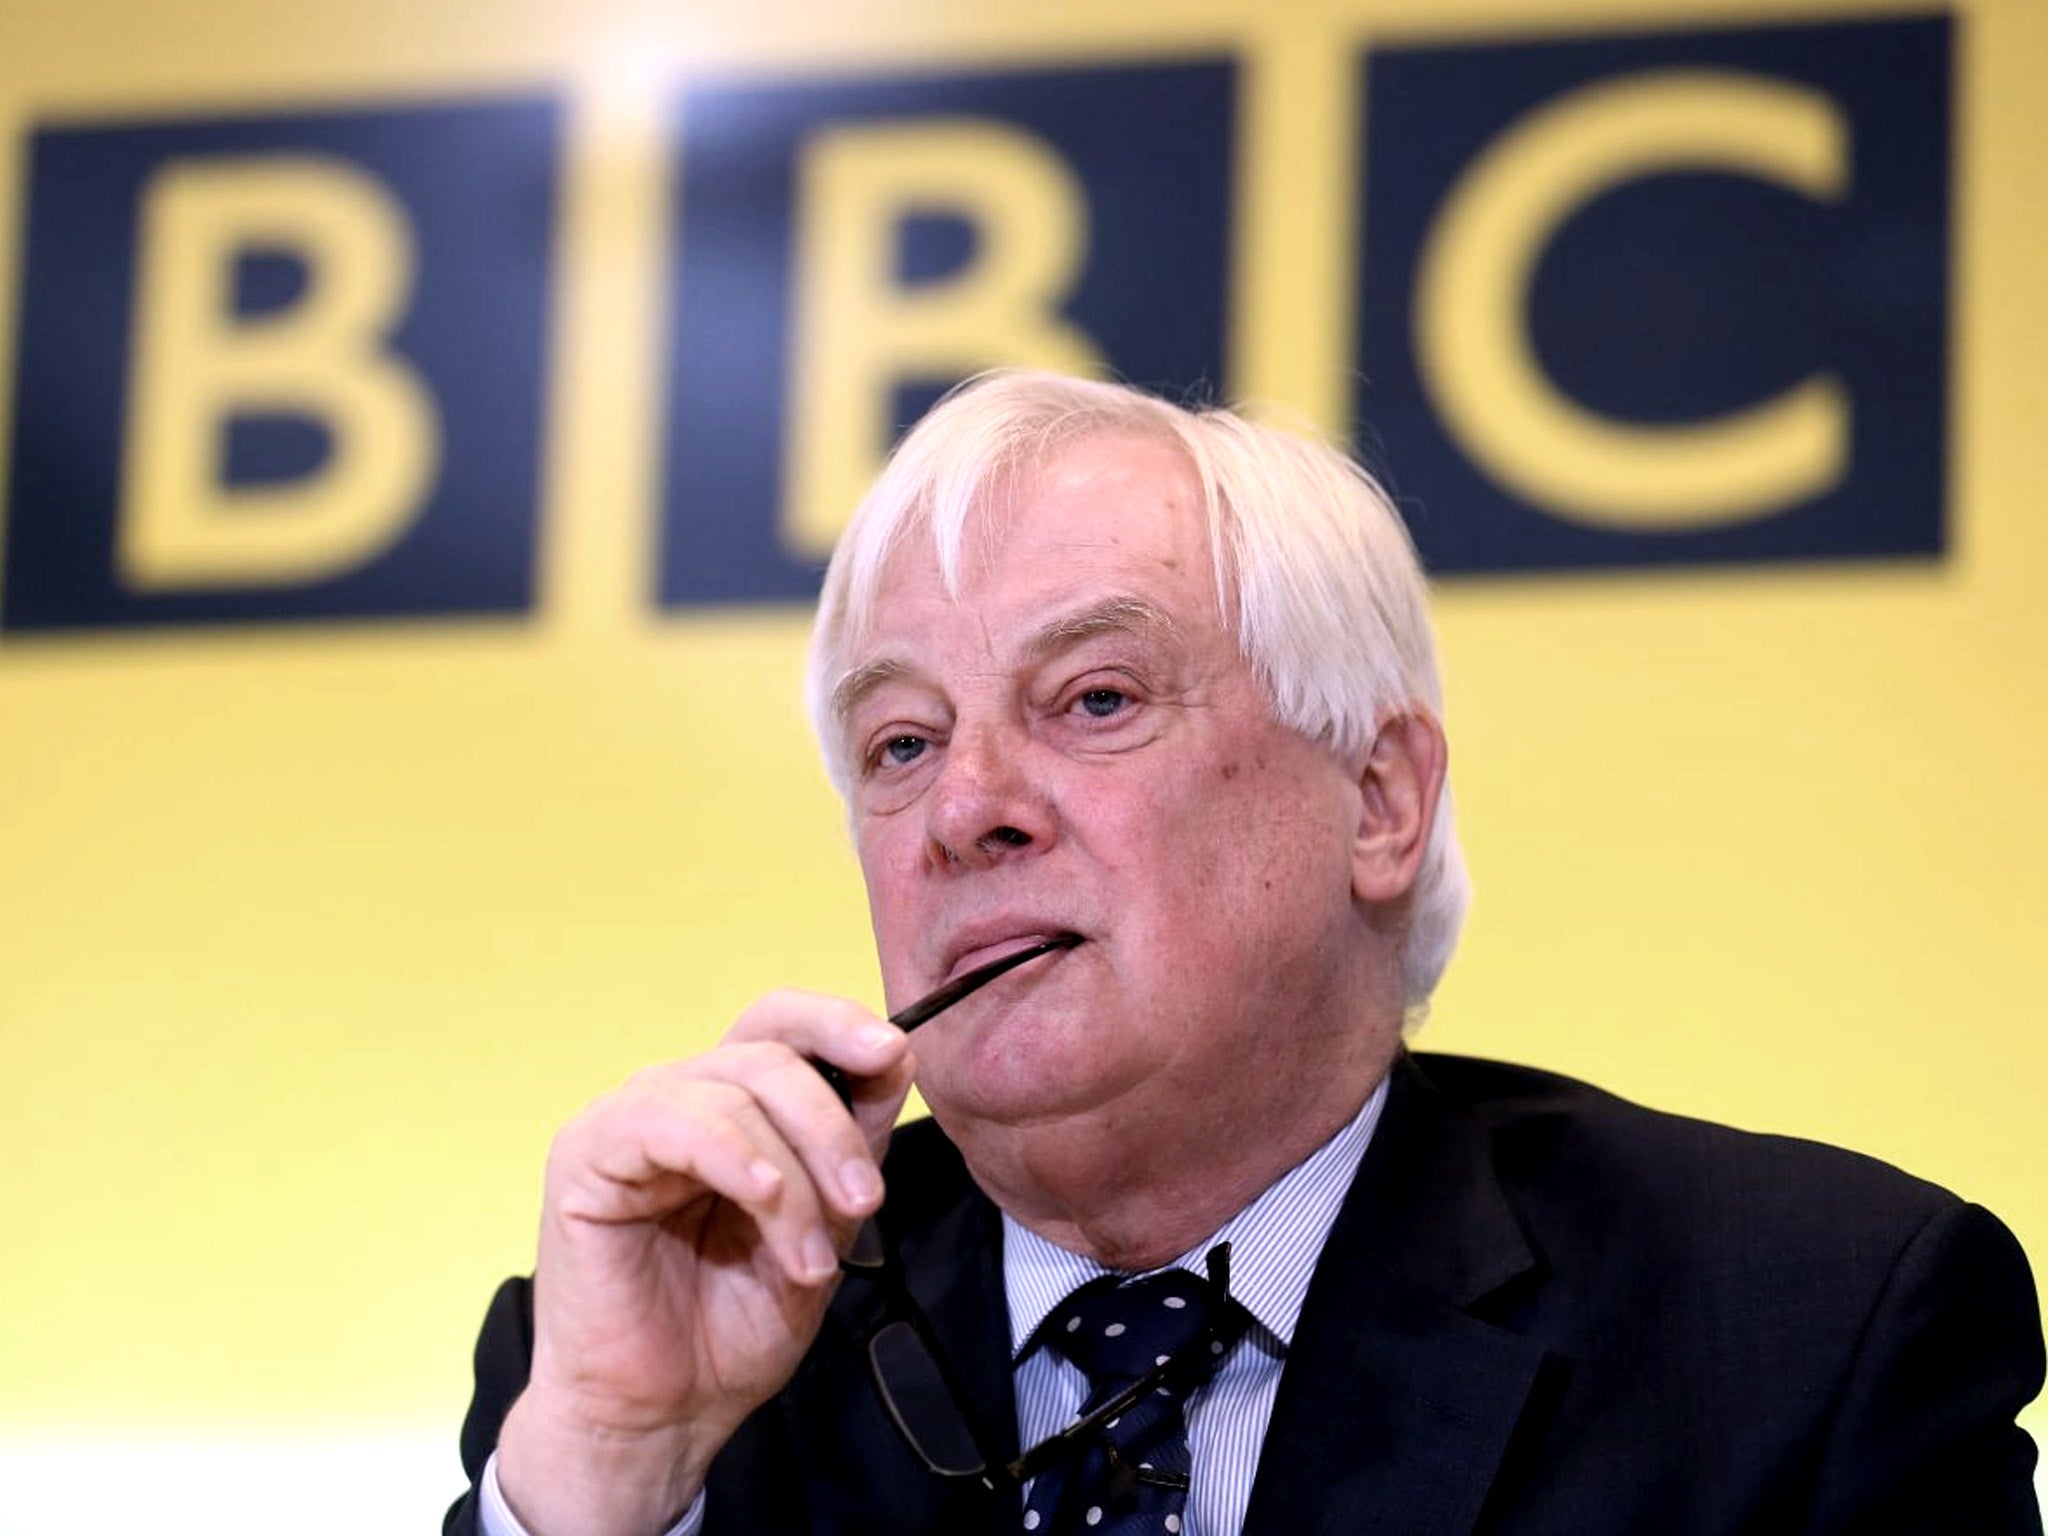 Lord Patten, pictured, as former BBC Trust chairman